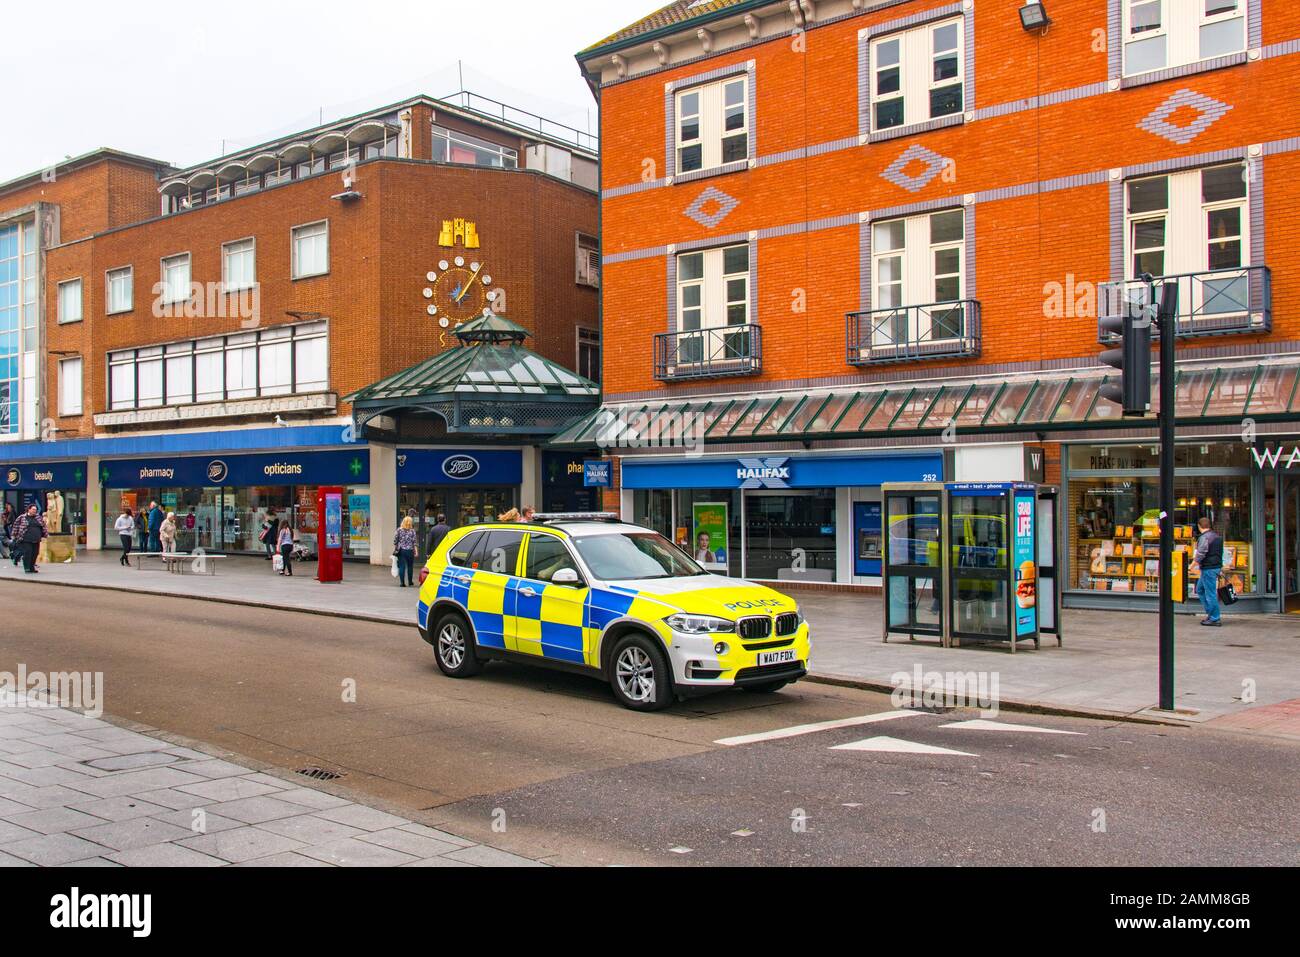 EXETER, DEVON, UK - 31MAR19: Devon and Cornwall Police car outside Boots in Exeter High Street. Stock Photo